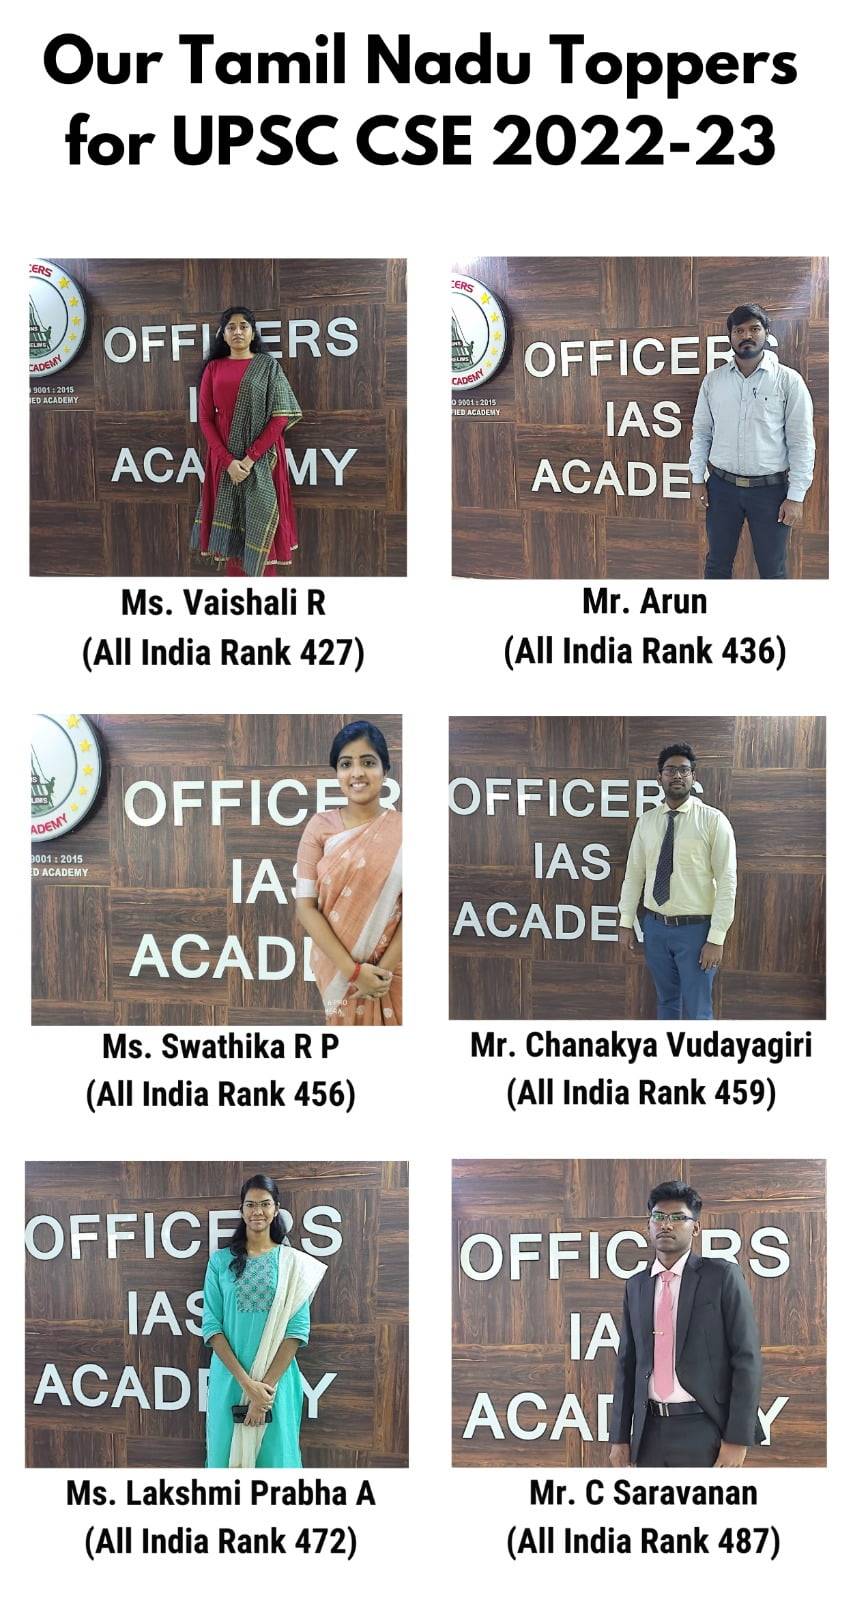 officers Ias academy